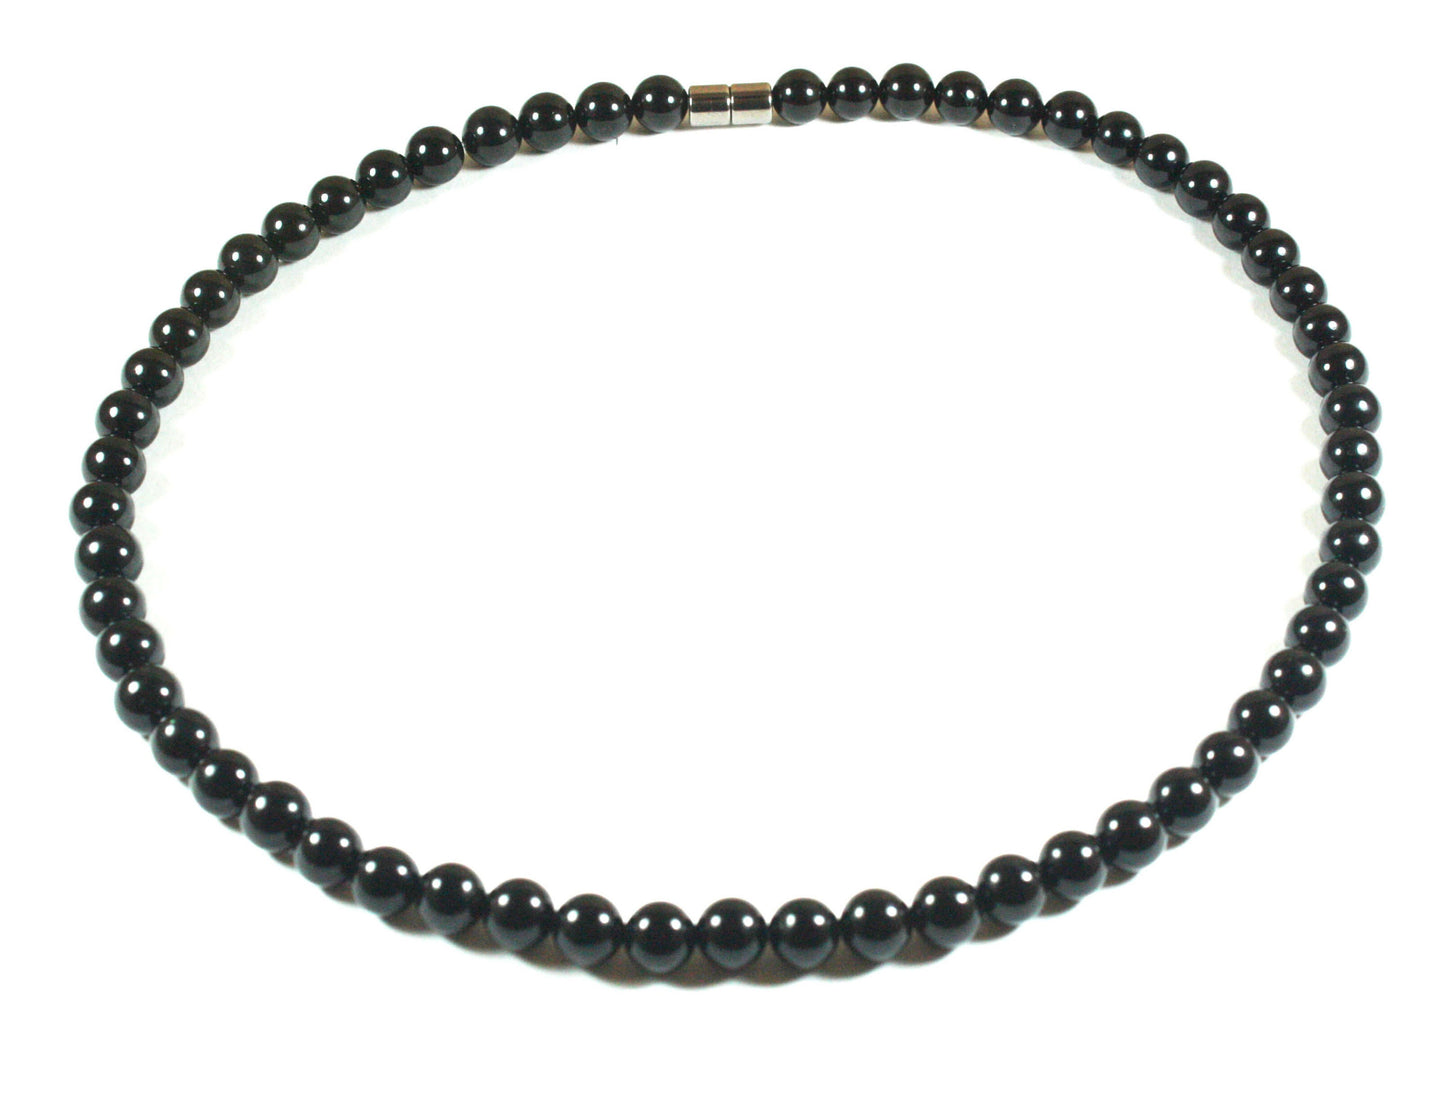 8mm Black Onyx Necklace - EMF Protection Jewelry - Empath Protection - Necklaces for Women/Men - Protection Stones with Magnetic clasp